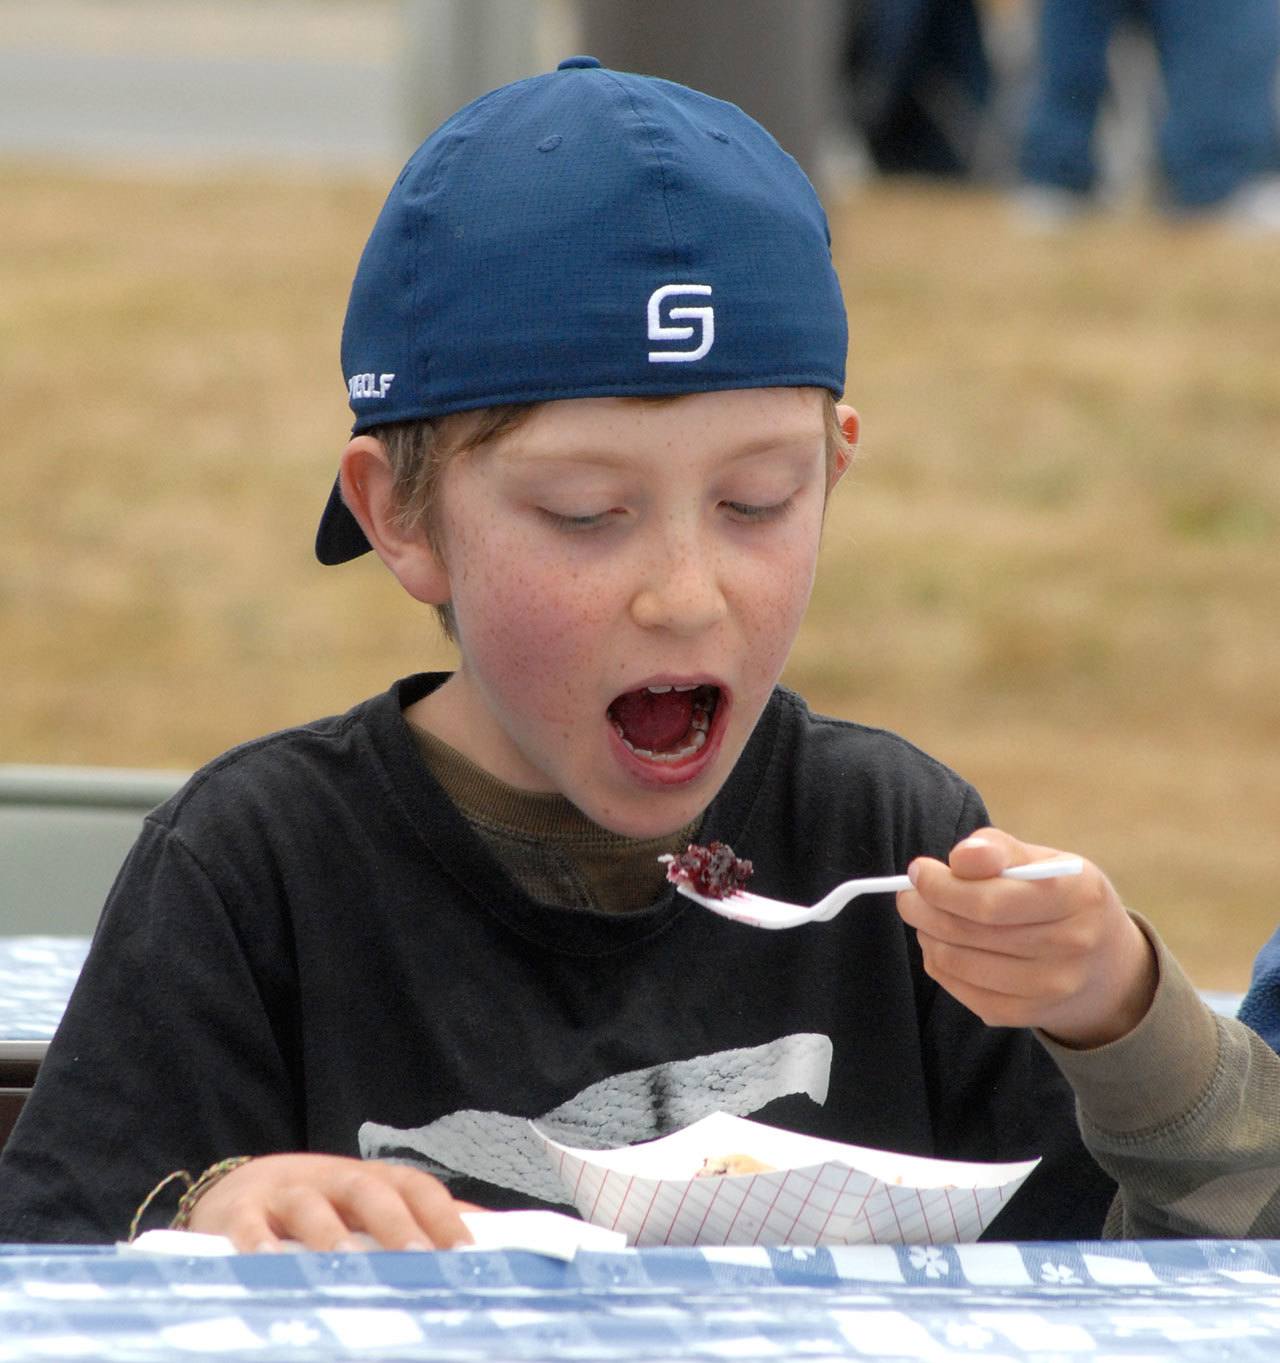 Max Vadset, 10, of Carlsborg opens wide for a bite of blackberry pie. (Keith Thorpe/Peninsula Daily News)